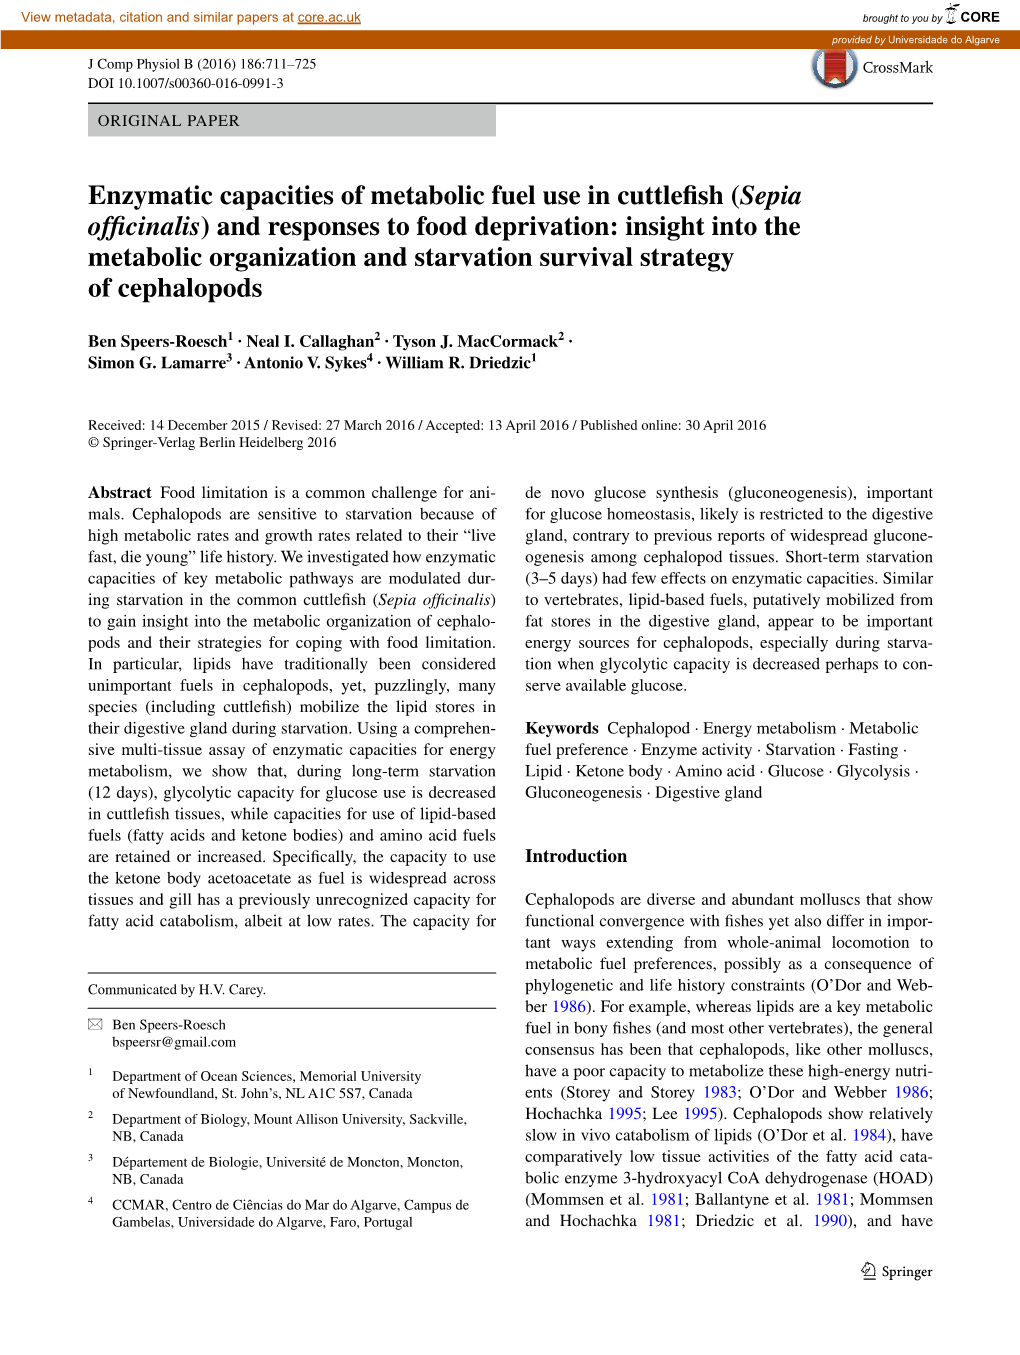 Enzymatic Capacities of Metabolic Fuel Use in Cuttlefish